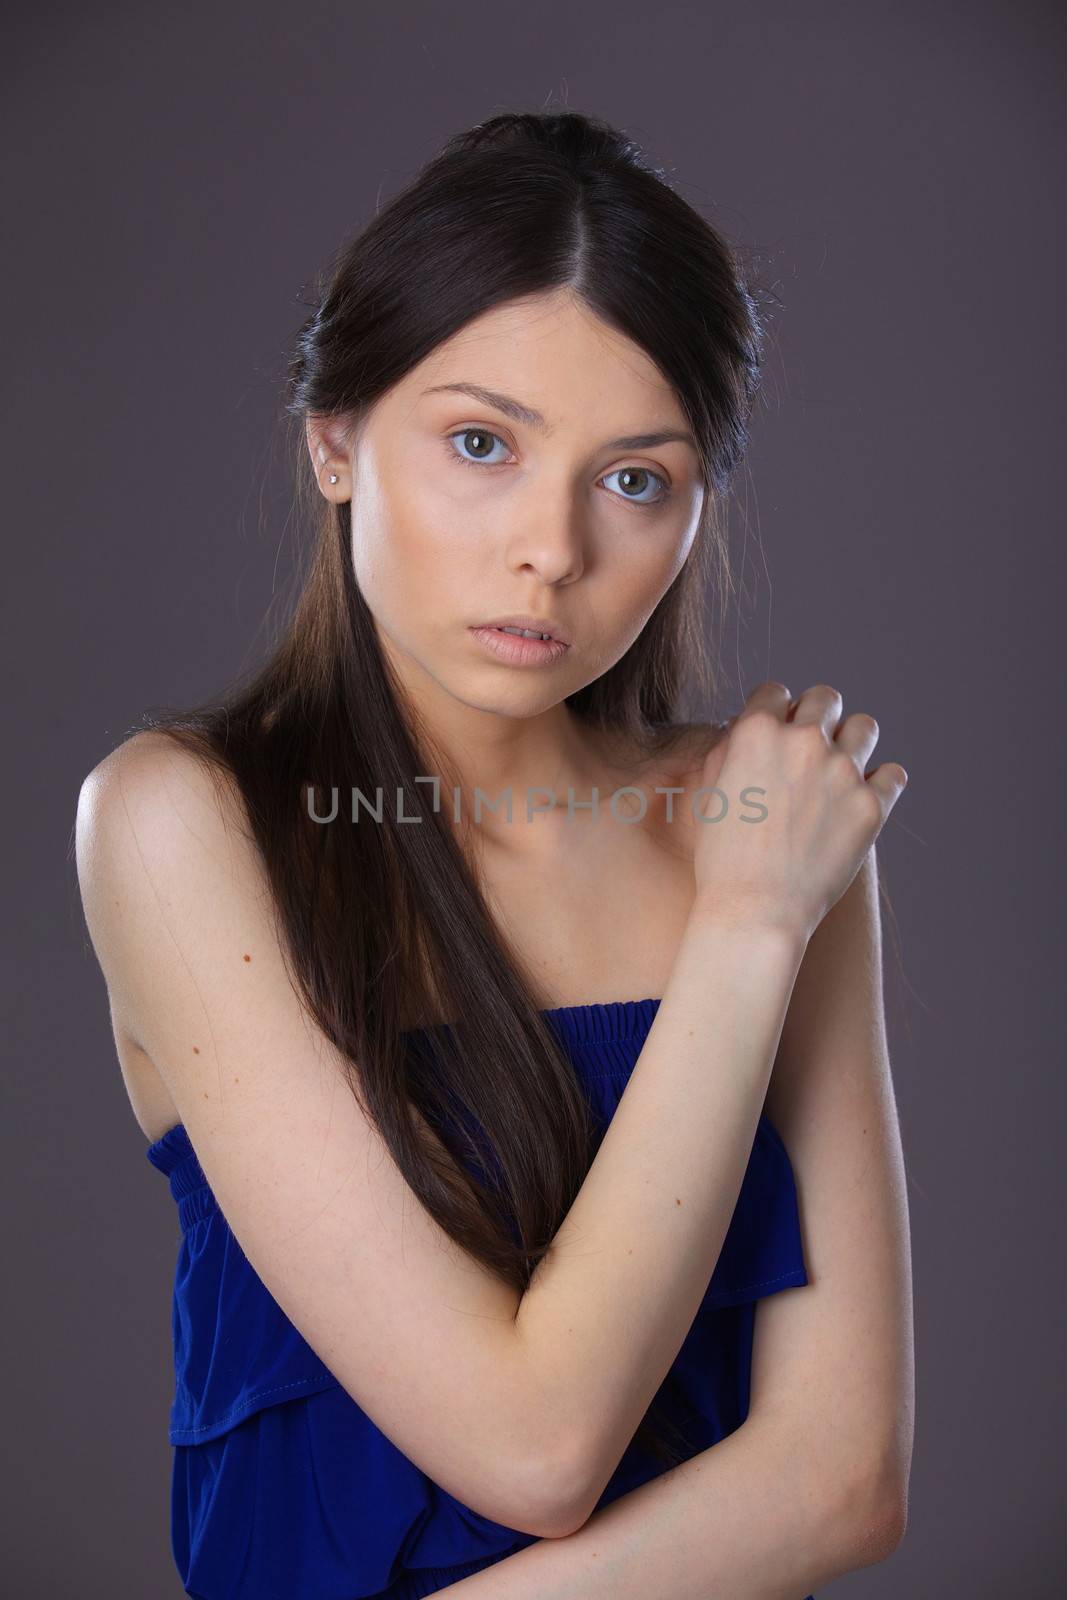 Glamour portrait of beautiful woman model with fresh daily makeup and romantic hairstyle.